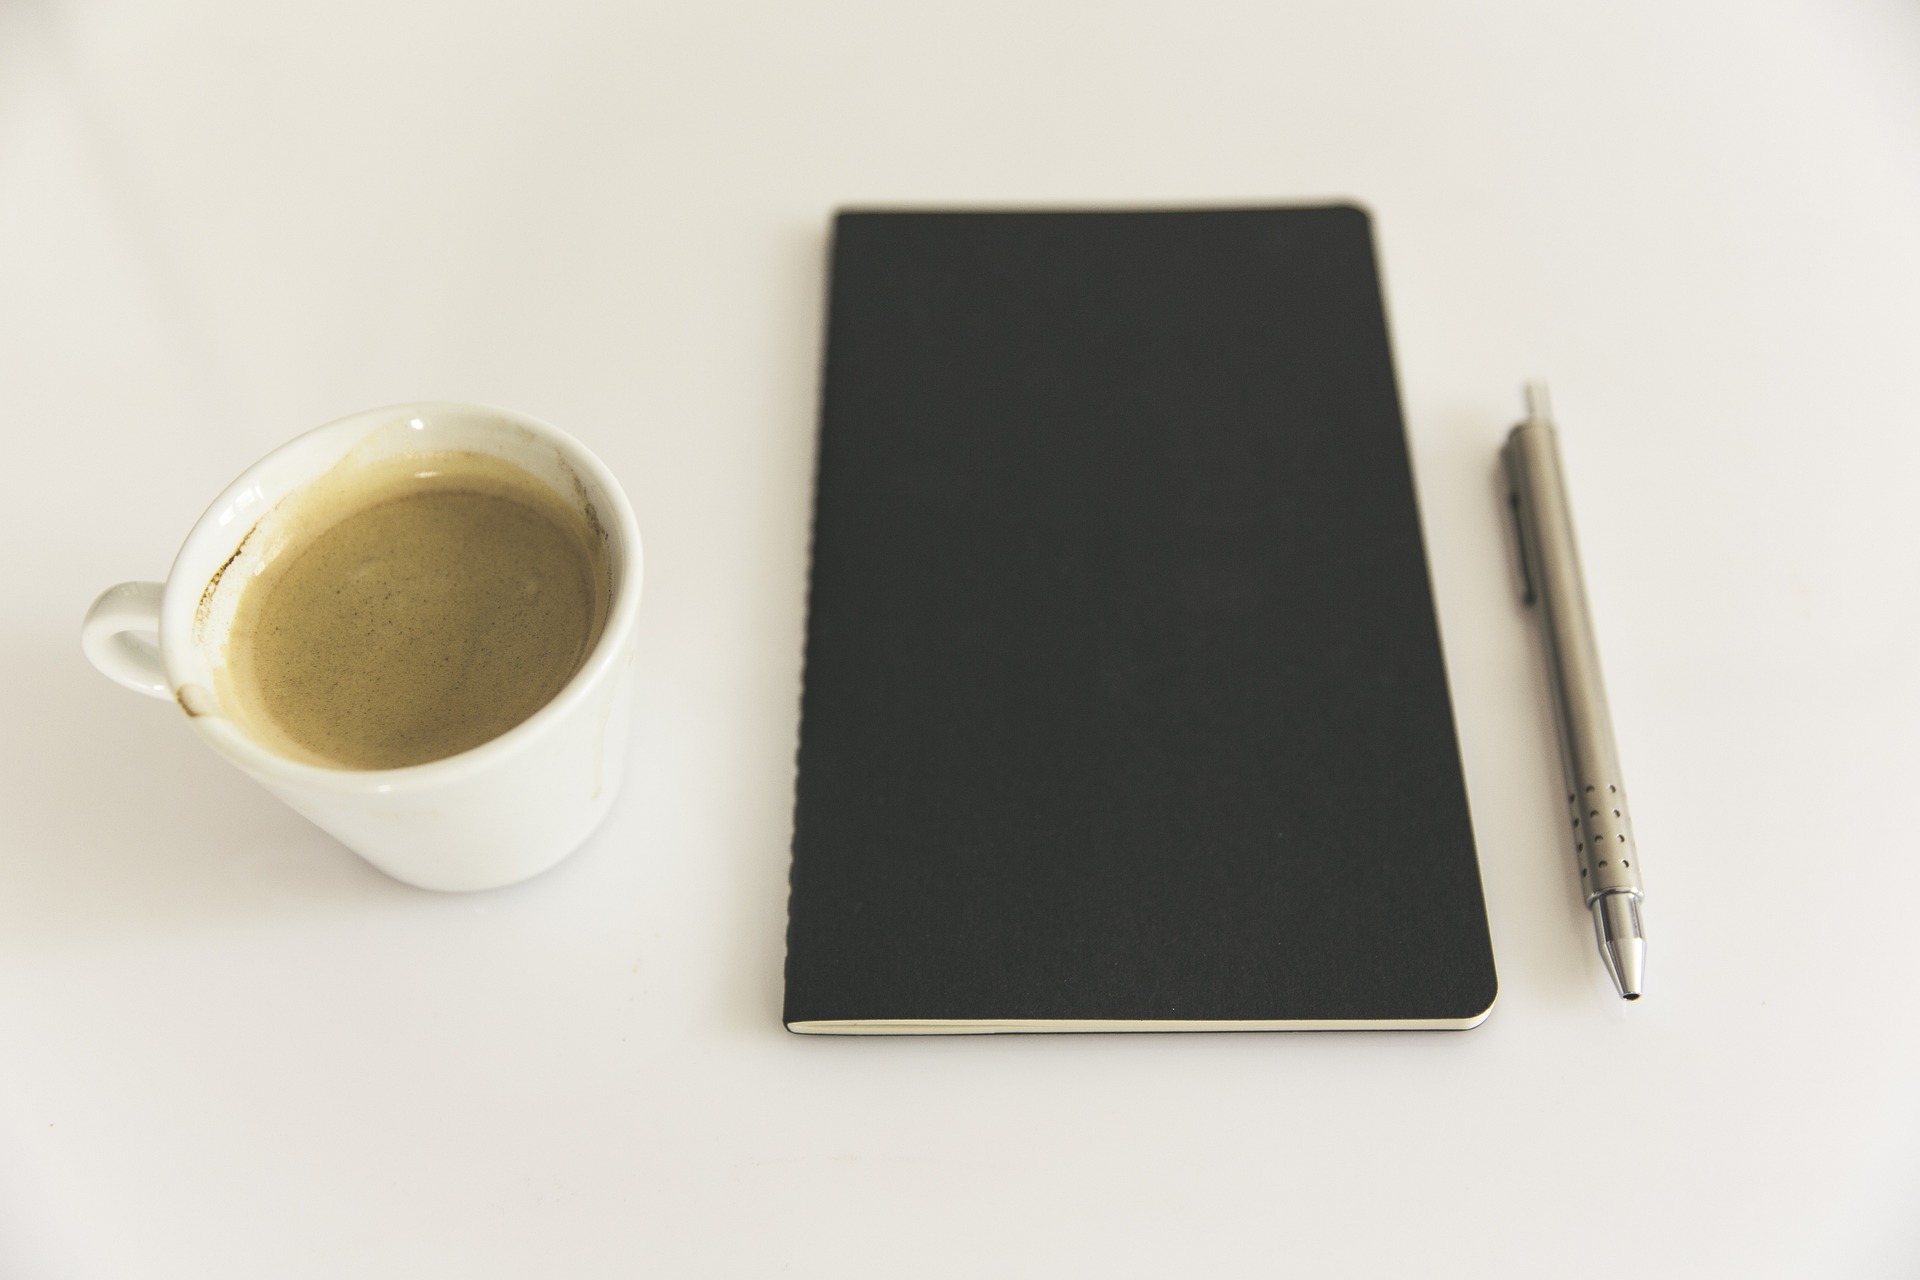 An image of a cup of coffee, a black booklet and a pen laid out on a white desk.